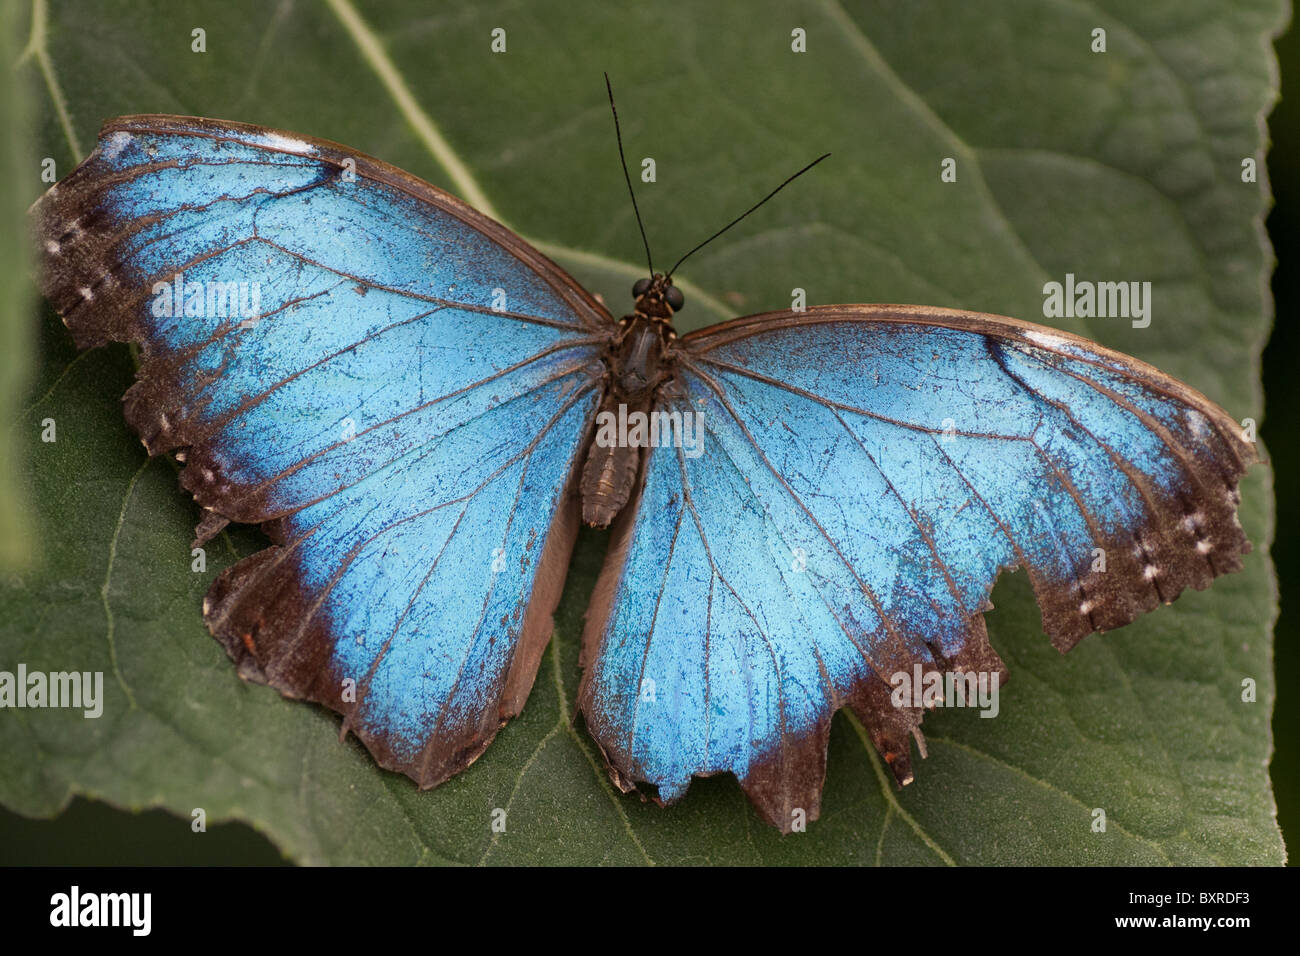 Large blue (Morpho) butterfly resting on a leaf Stock Photo